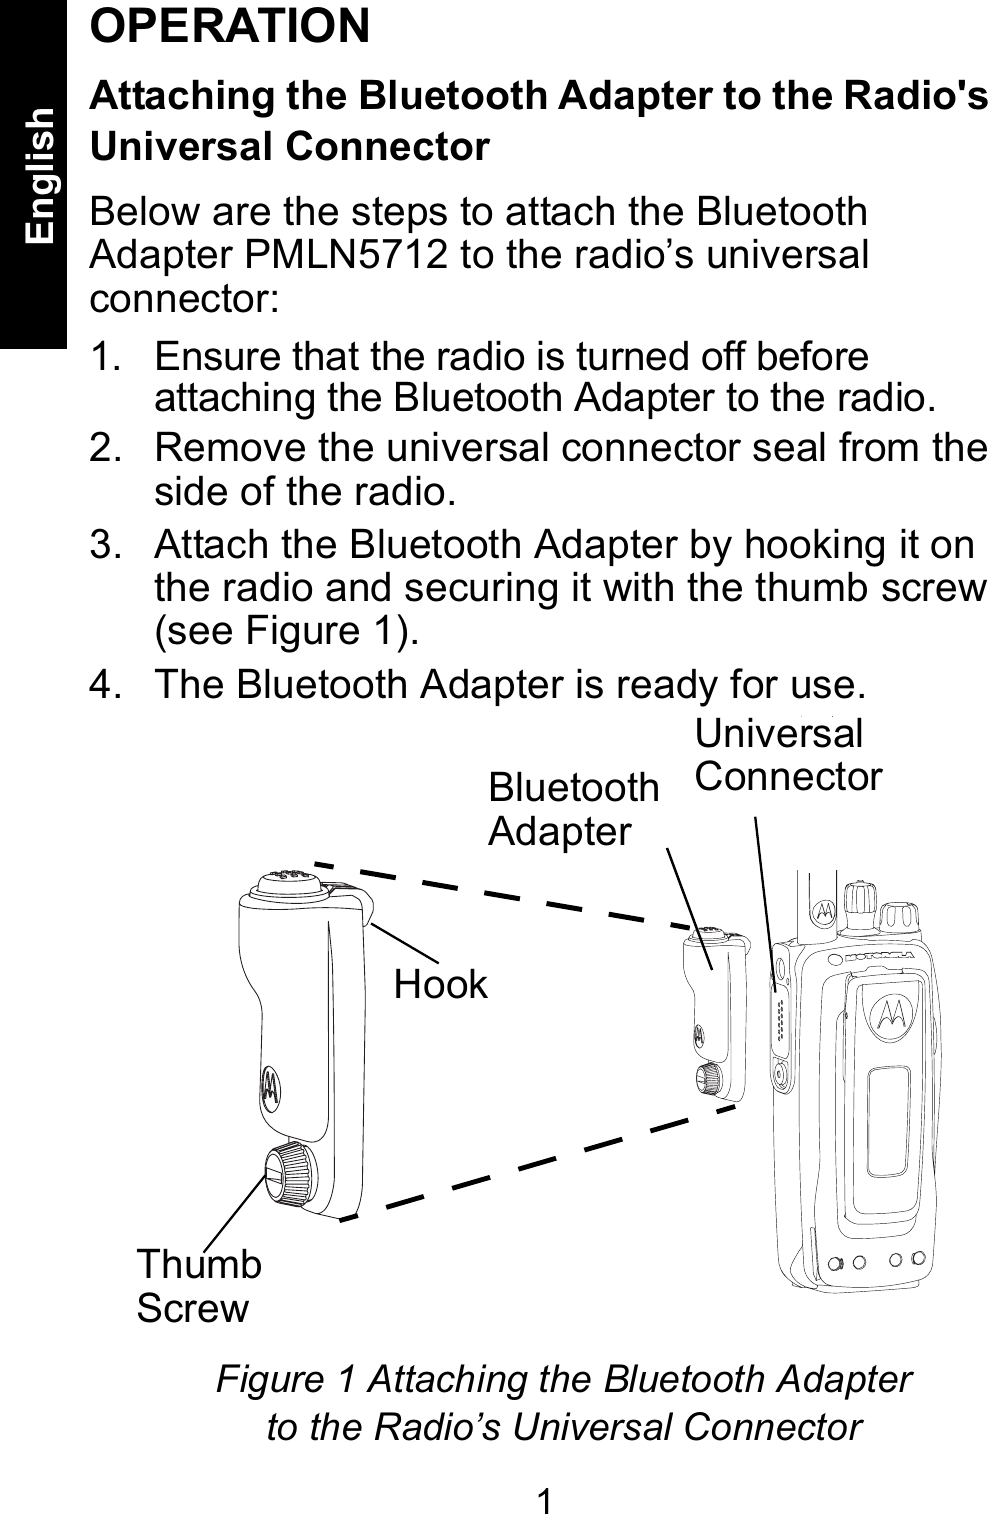 1EnglishOPERATIONAttaching the Bluetooth Adapter to the Radio&apos;s Universal ConnectorBelow are the steps to attach the Bluetooth Adapter PMLN5712 to the radio’s universal connector:  1. Ensure that the radio is turned off before attaching the Bluetooth Adapter to the radio.2. Remove the universal connector seal from the side of the radio. 3. Attach the Bluetooth Adapter by hooking it on the radio and securing it with the thumb screw (see Figure 1).4. The Bluetooth Adapter is ready for use. Bluetooth AdapterHookThumbScrewFigure 1 Attaching the Bluetooth Adapter to the Radio’s Universal ConnectorUniversalConnector